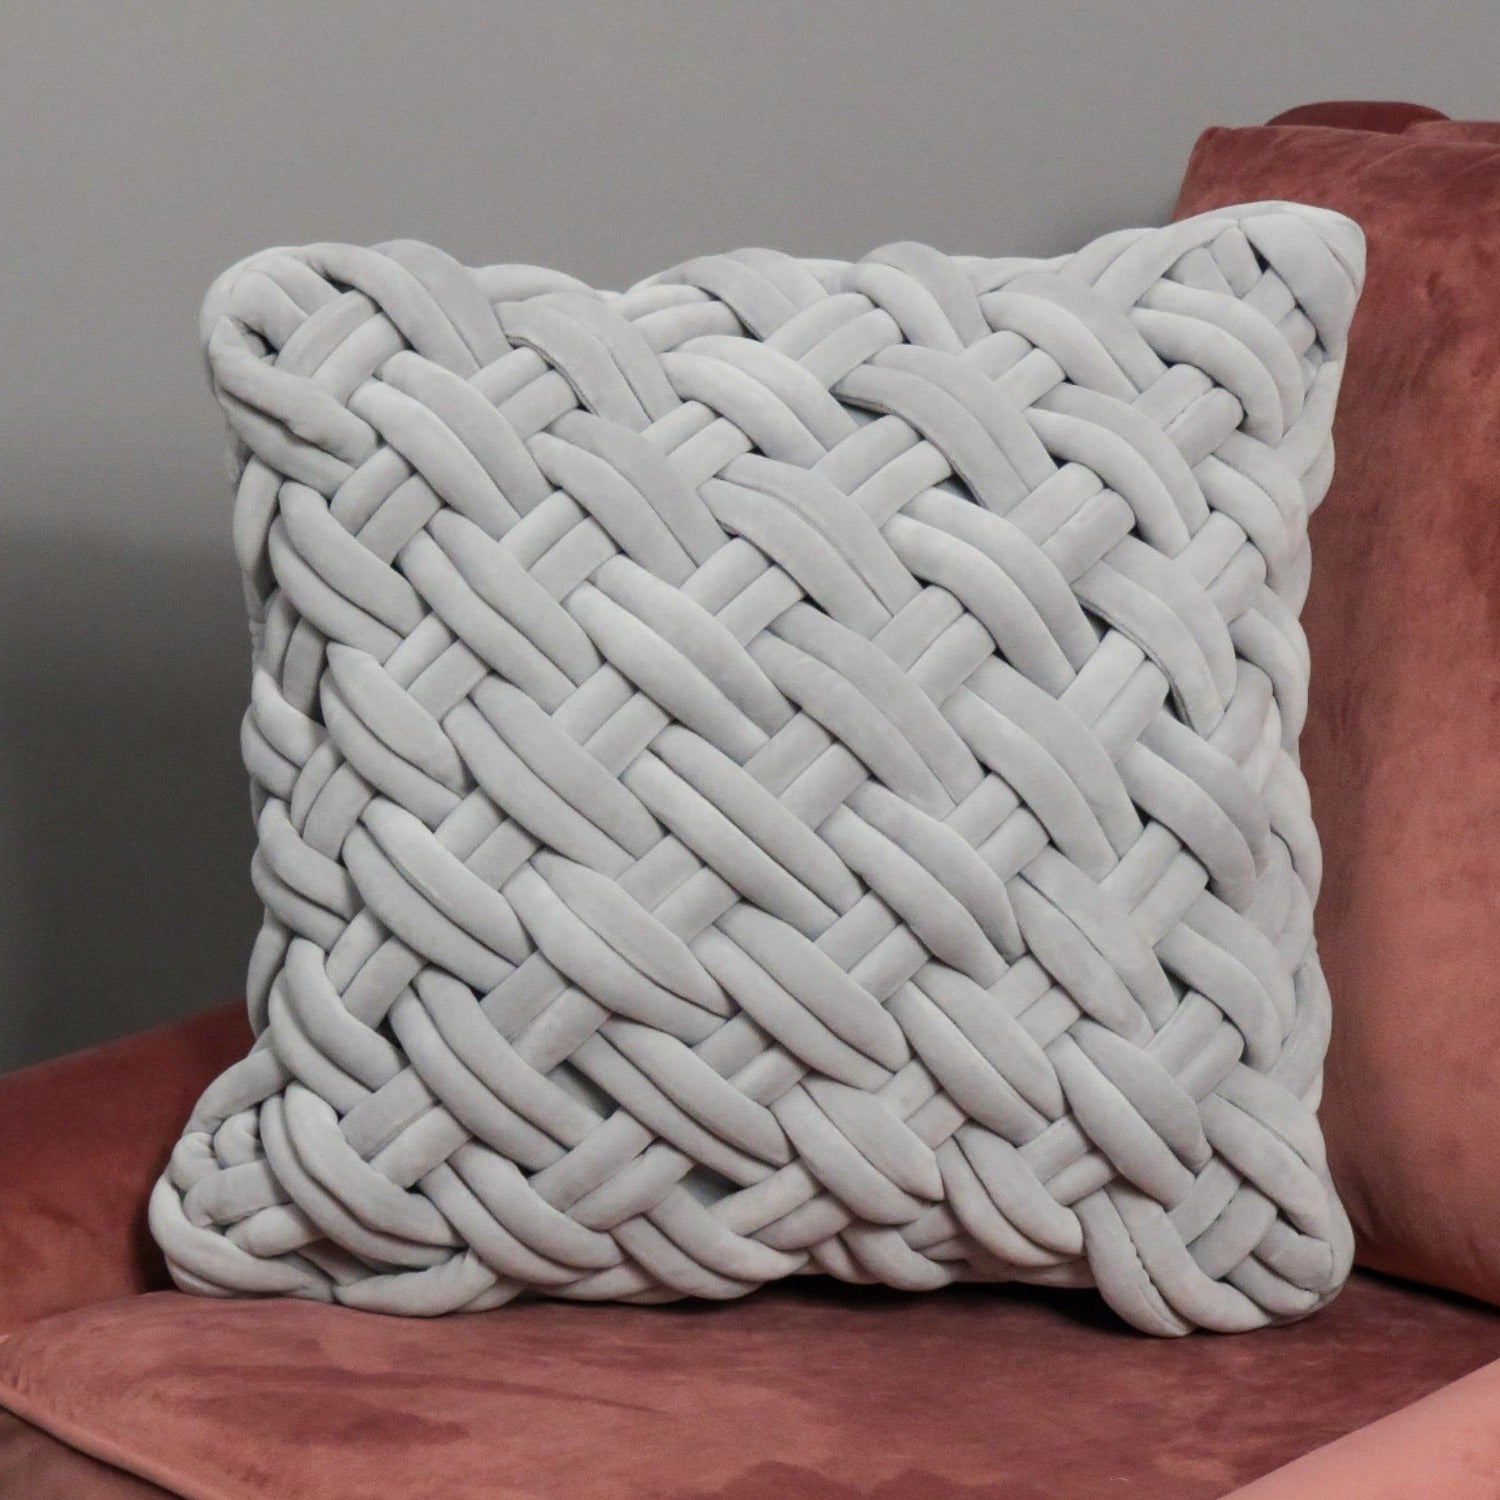 Grey handknotted velvet cushion cover by Native